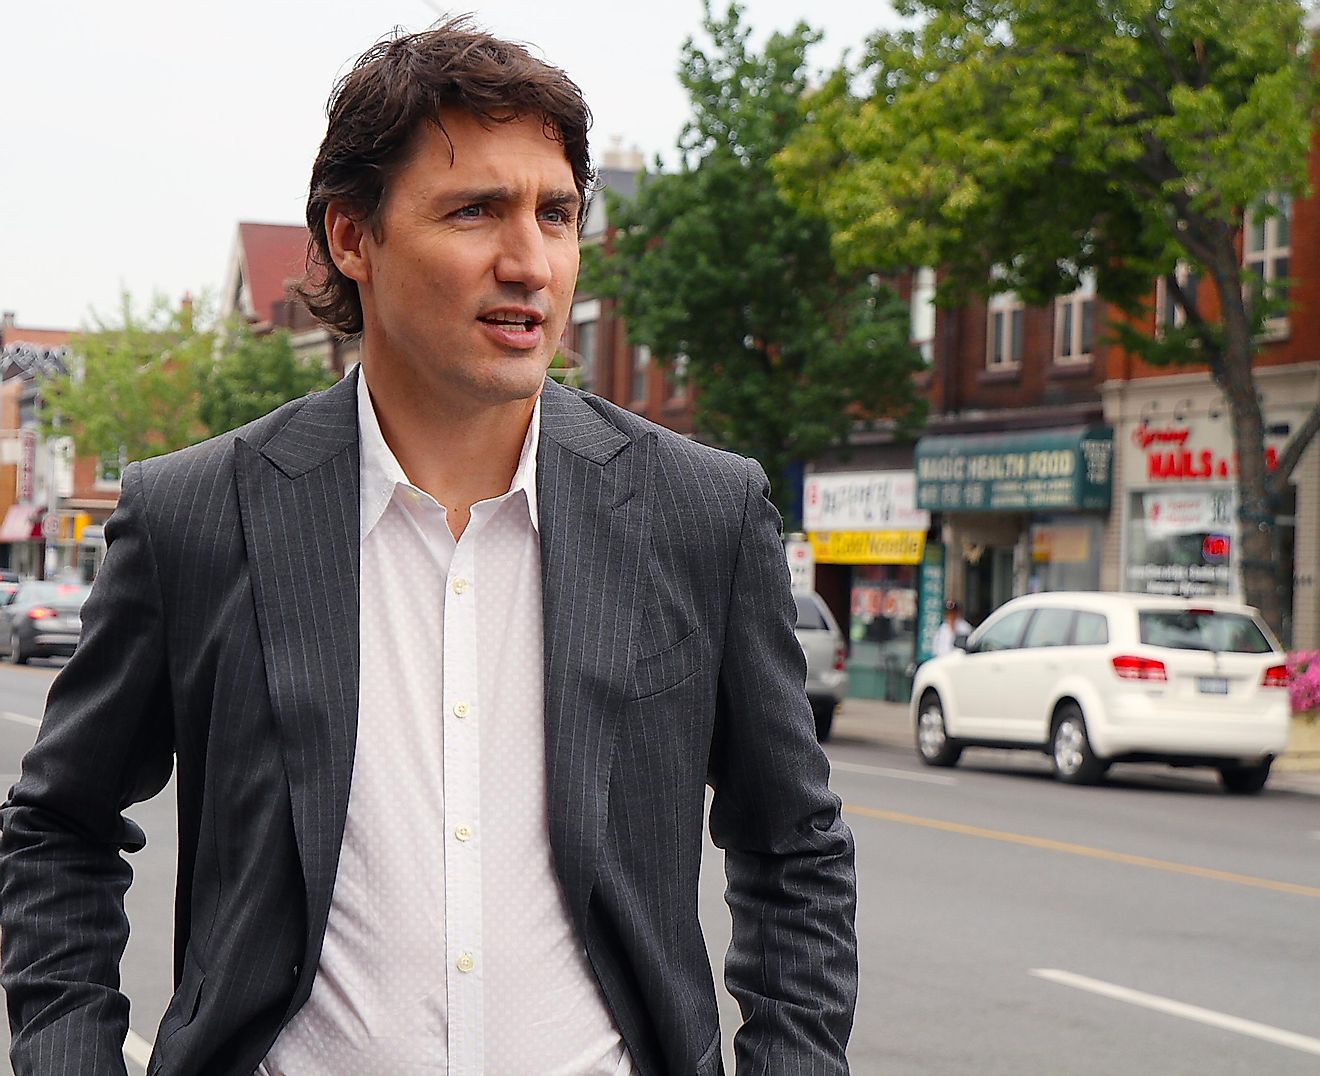 Trudeau follwed his father's footsteps into politics. Image credit: wikimedia.org